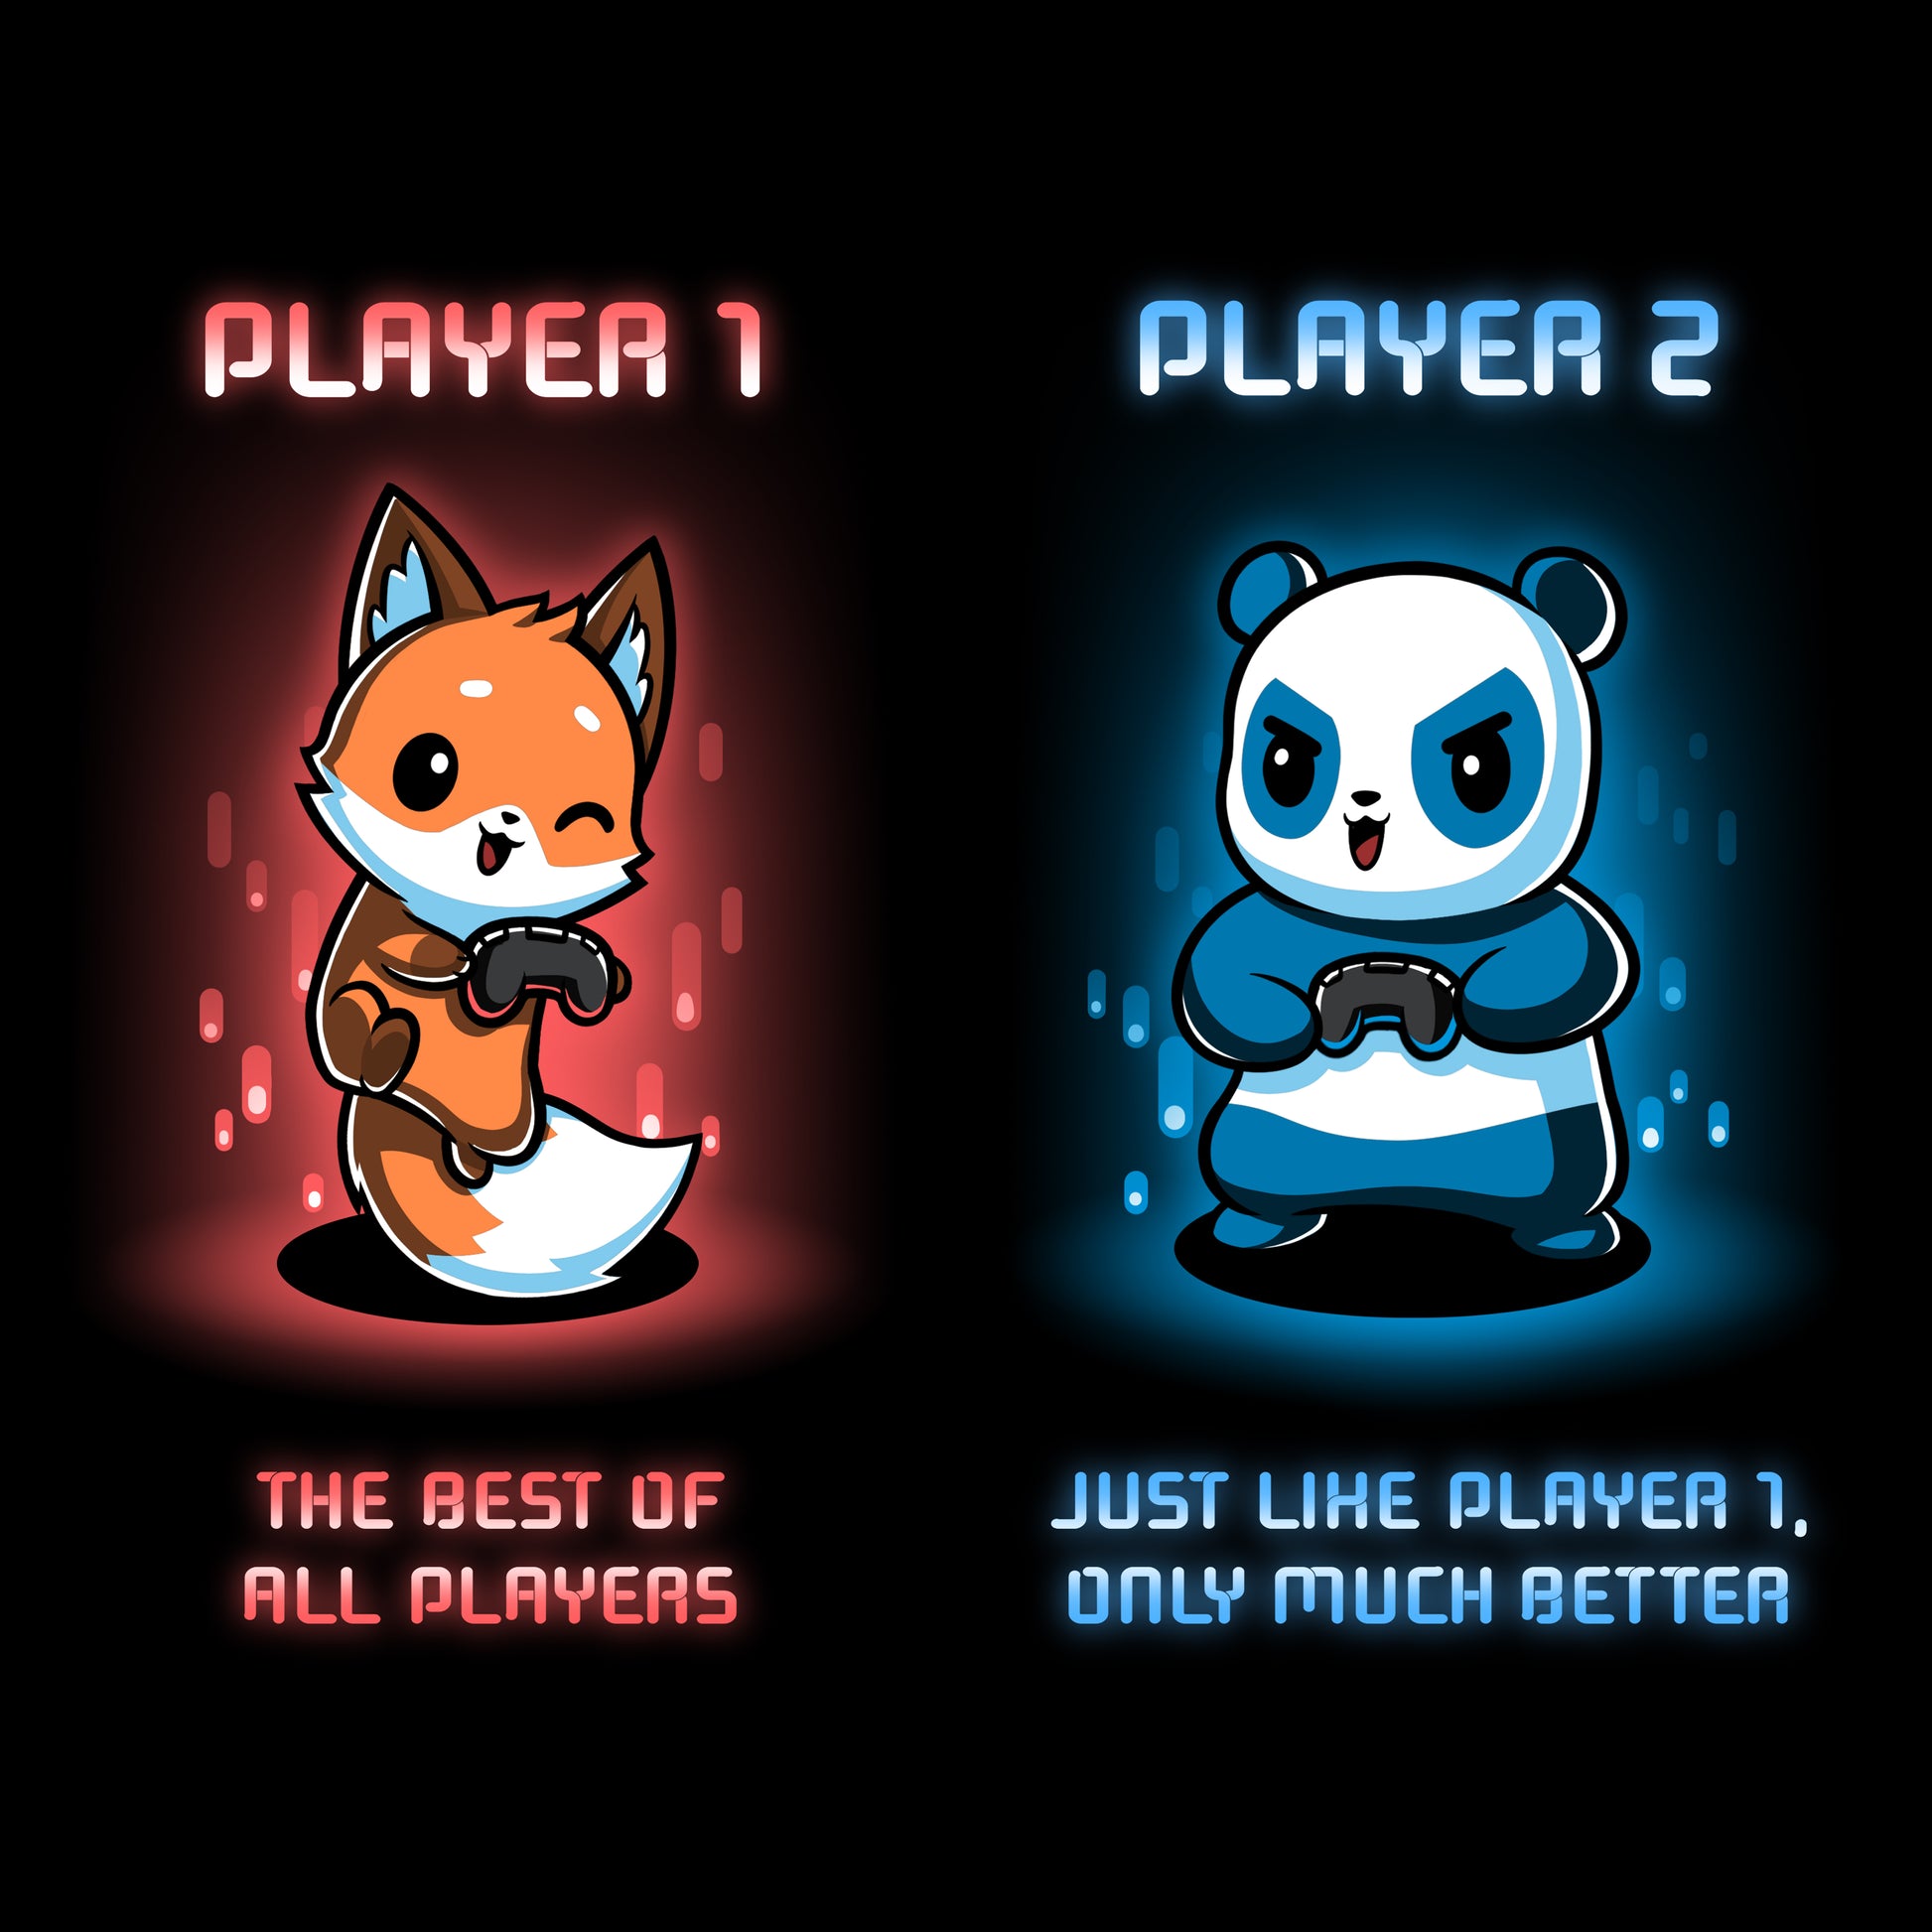 Two Player 1 and Player 2 panda bears featured on a TeeTurtle t-shirt.